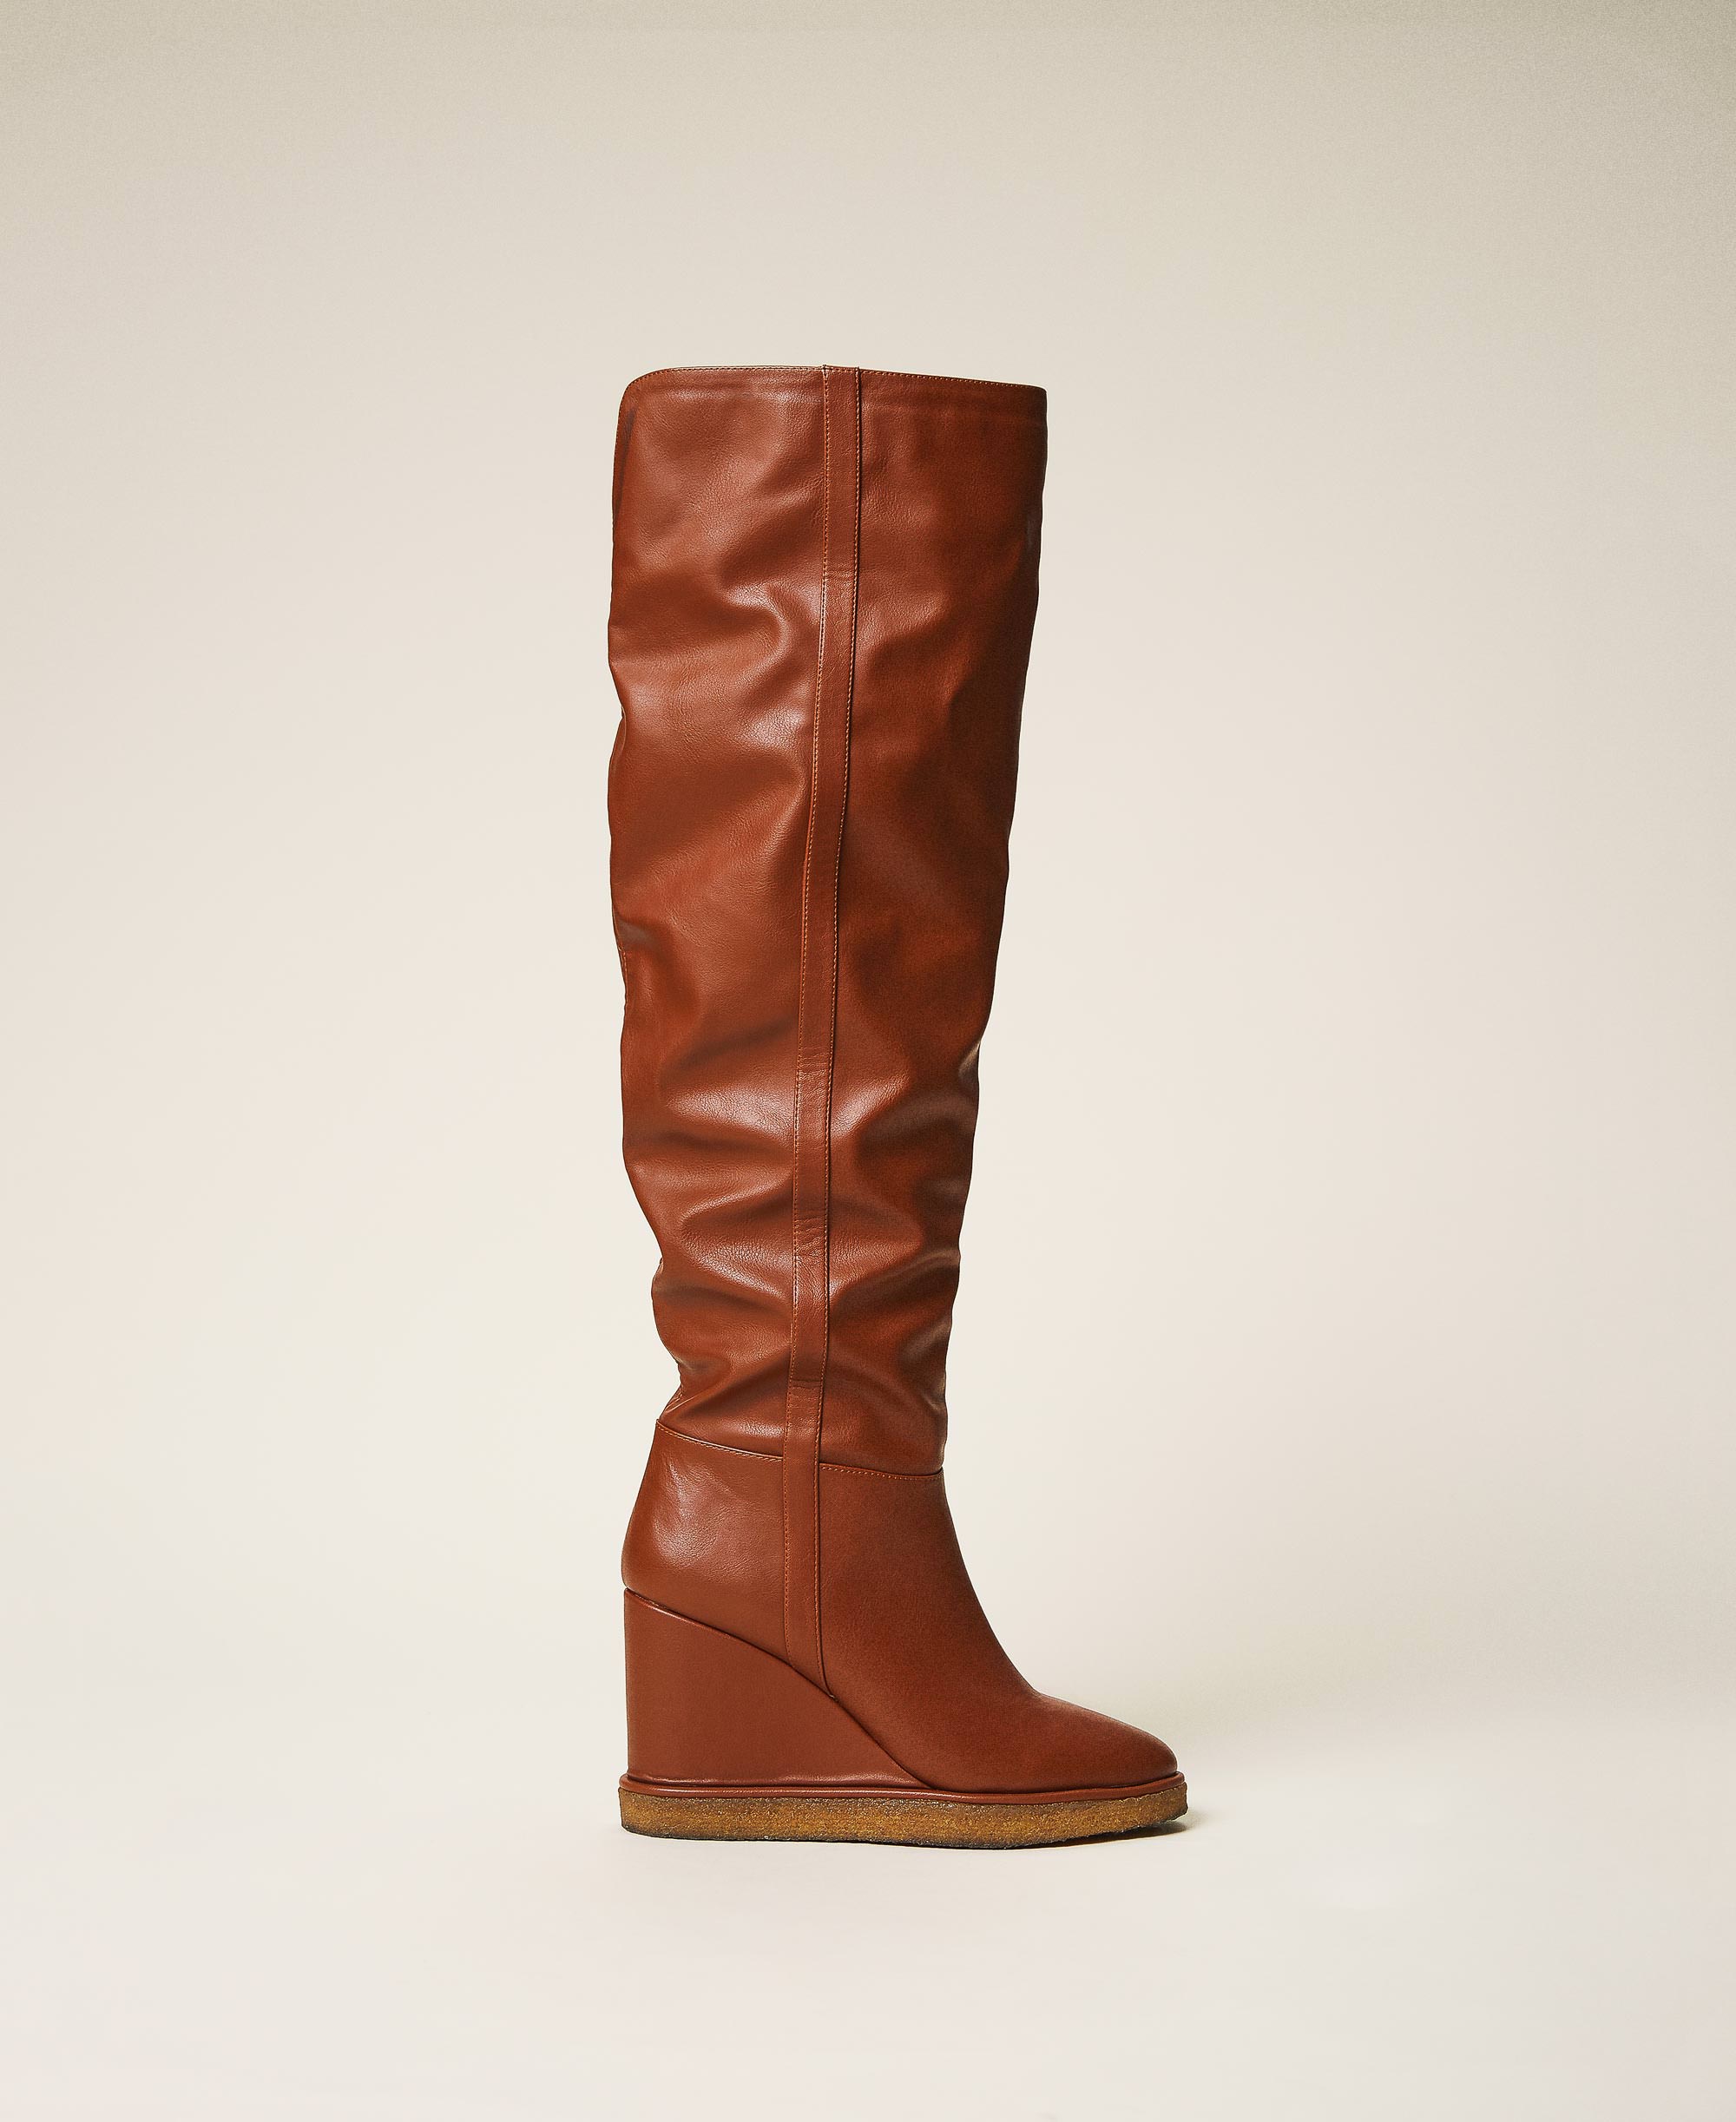 Thigh-high boots with wedge